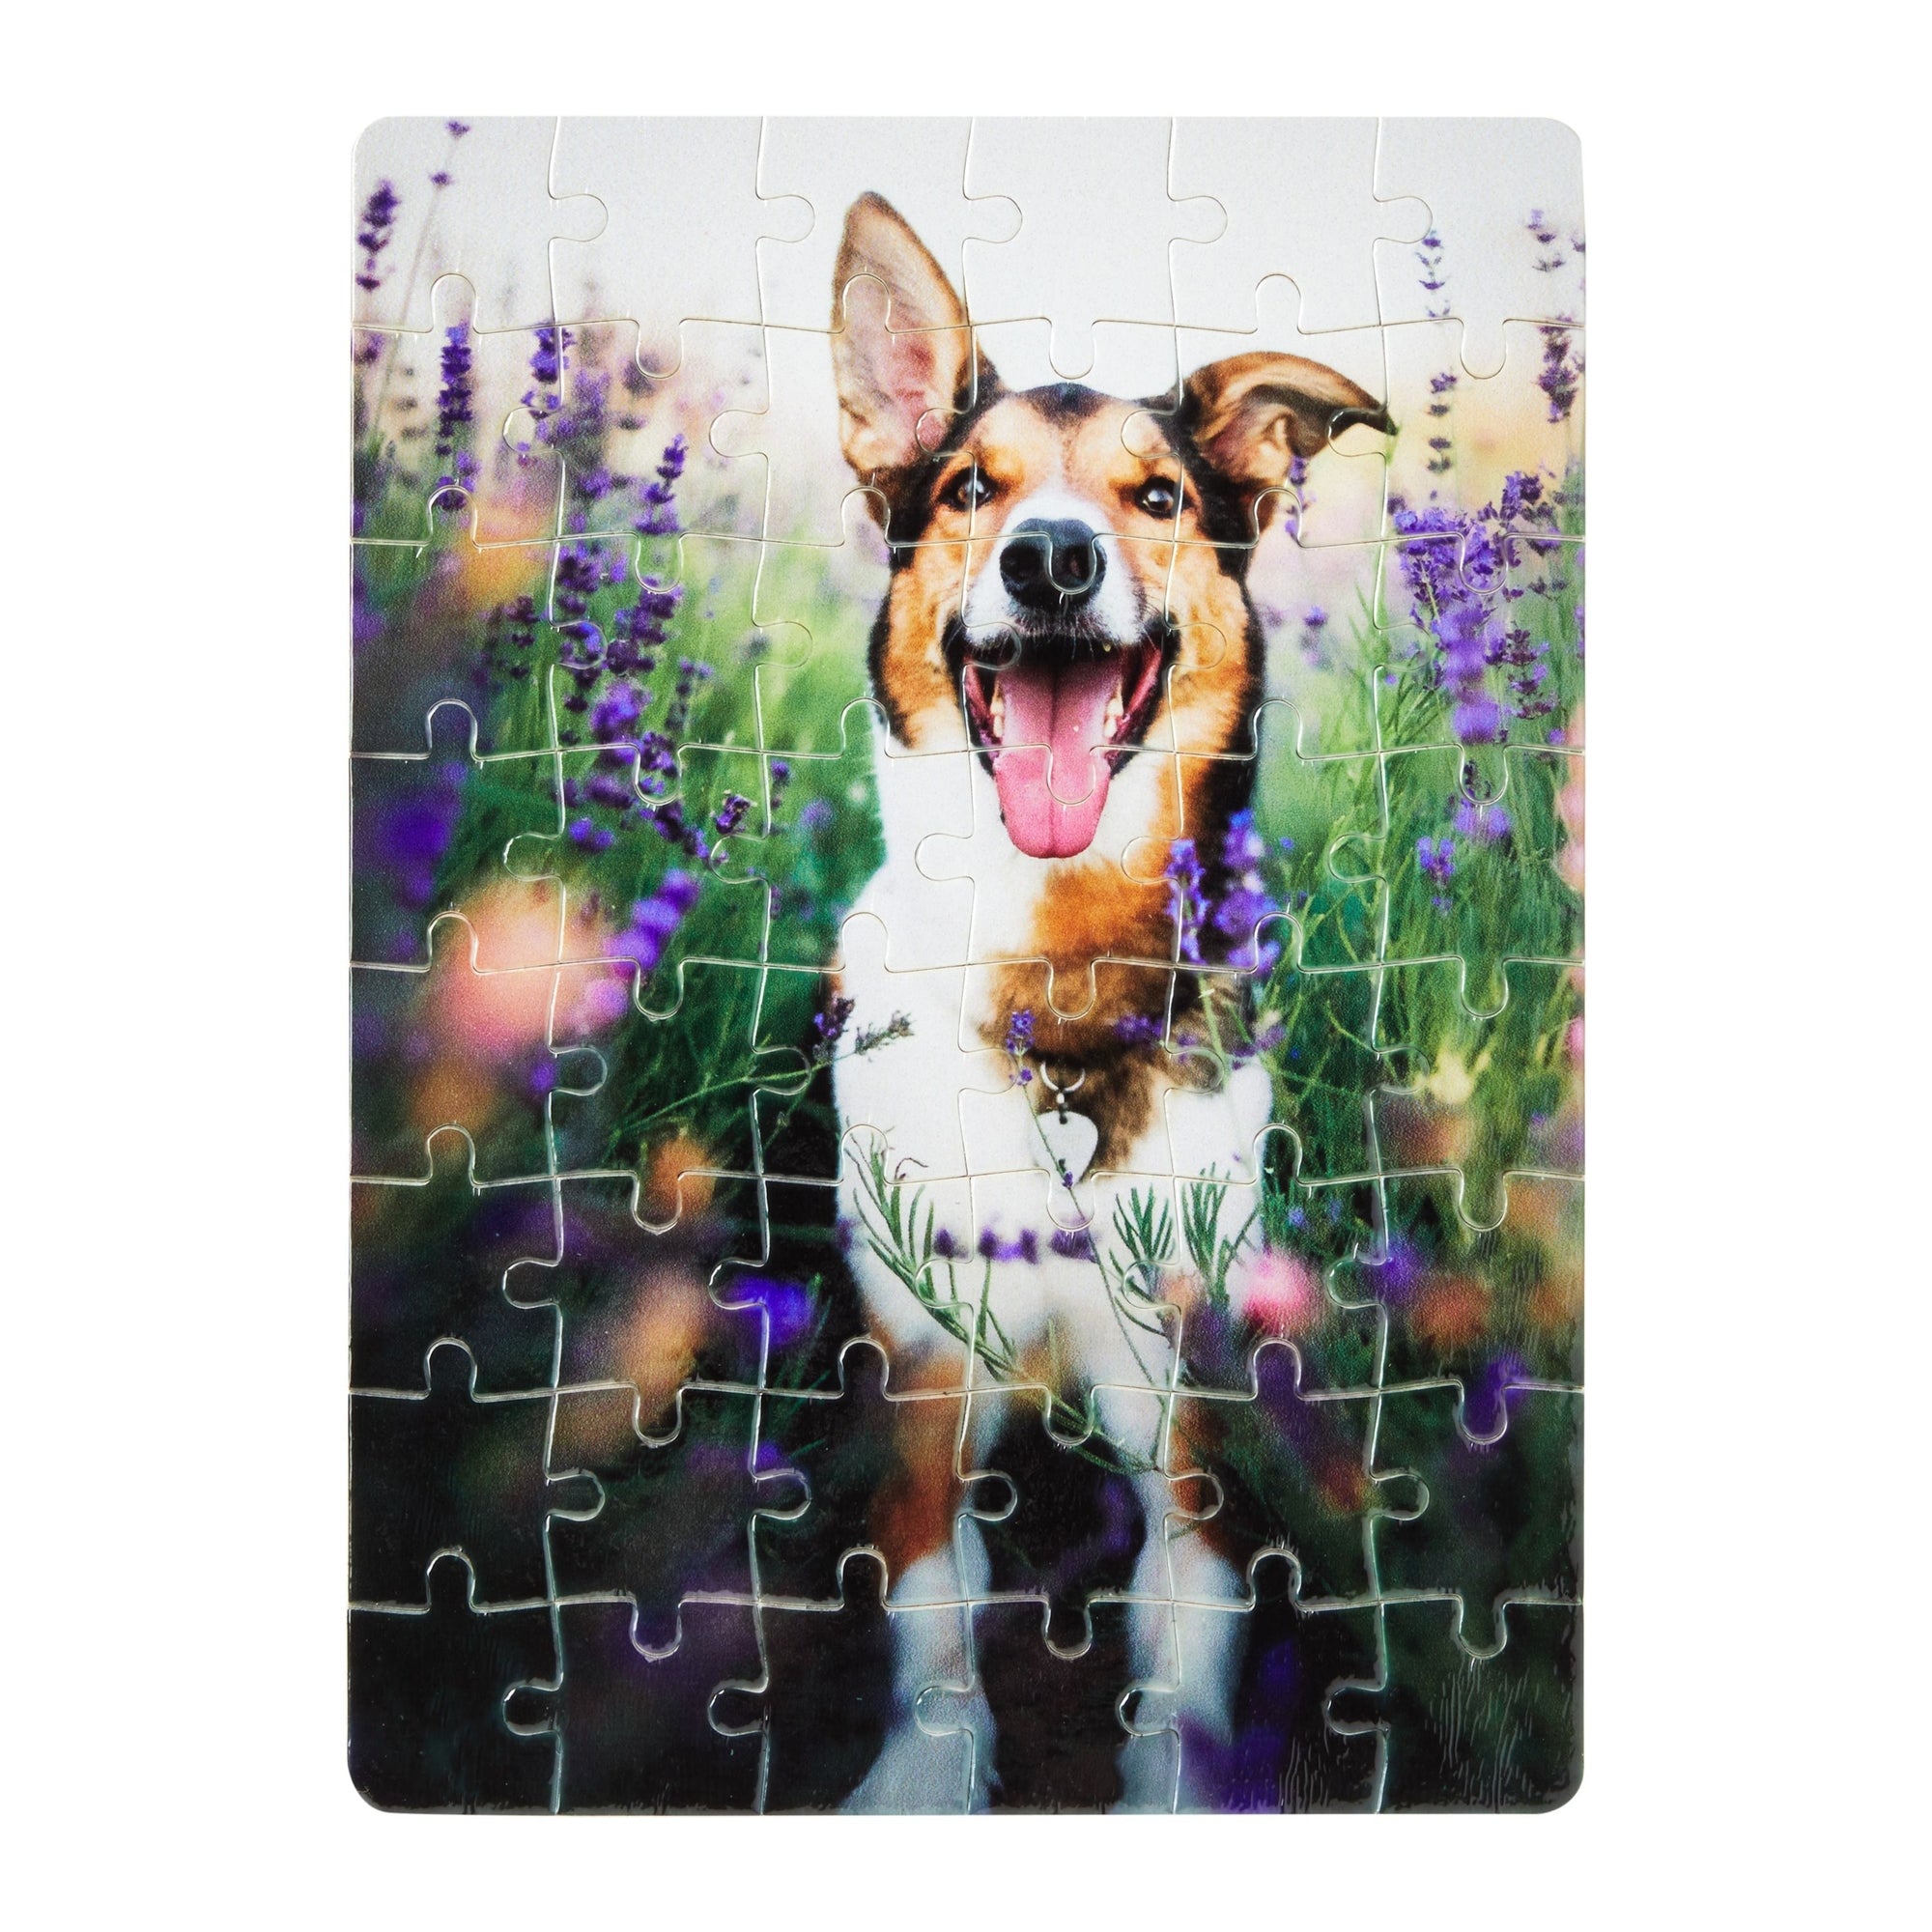 10 Pack A4 Blank Sublimation Puzzles, Custom Puzzle for DIY Crafts, White  Cardboard Heat Press Jigsaw, 120 Pieces, Bulk